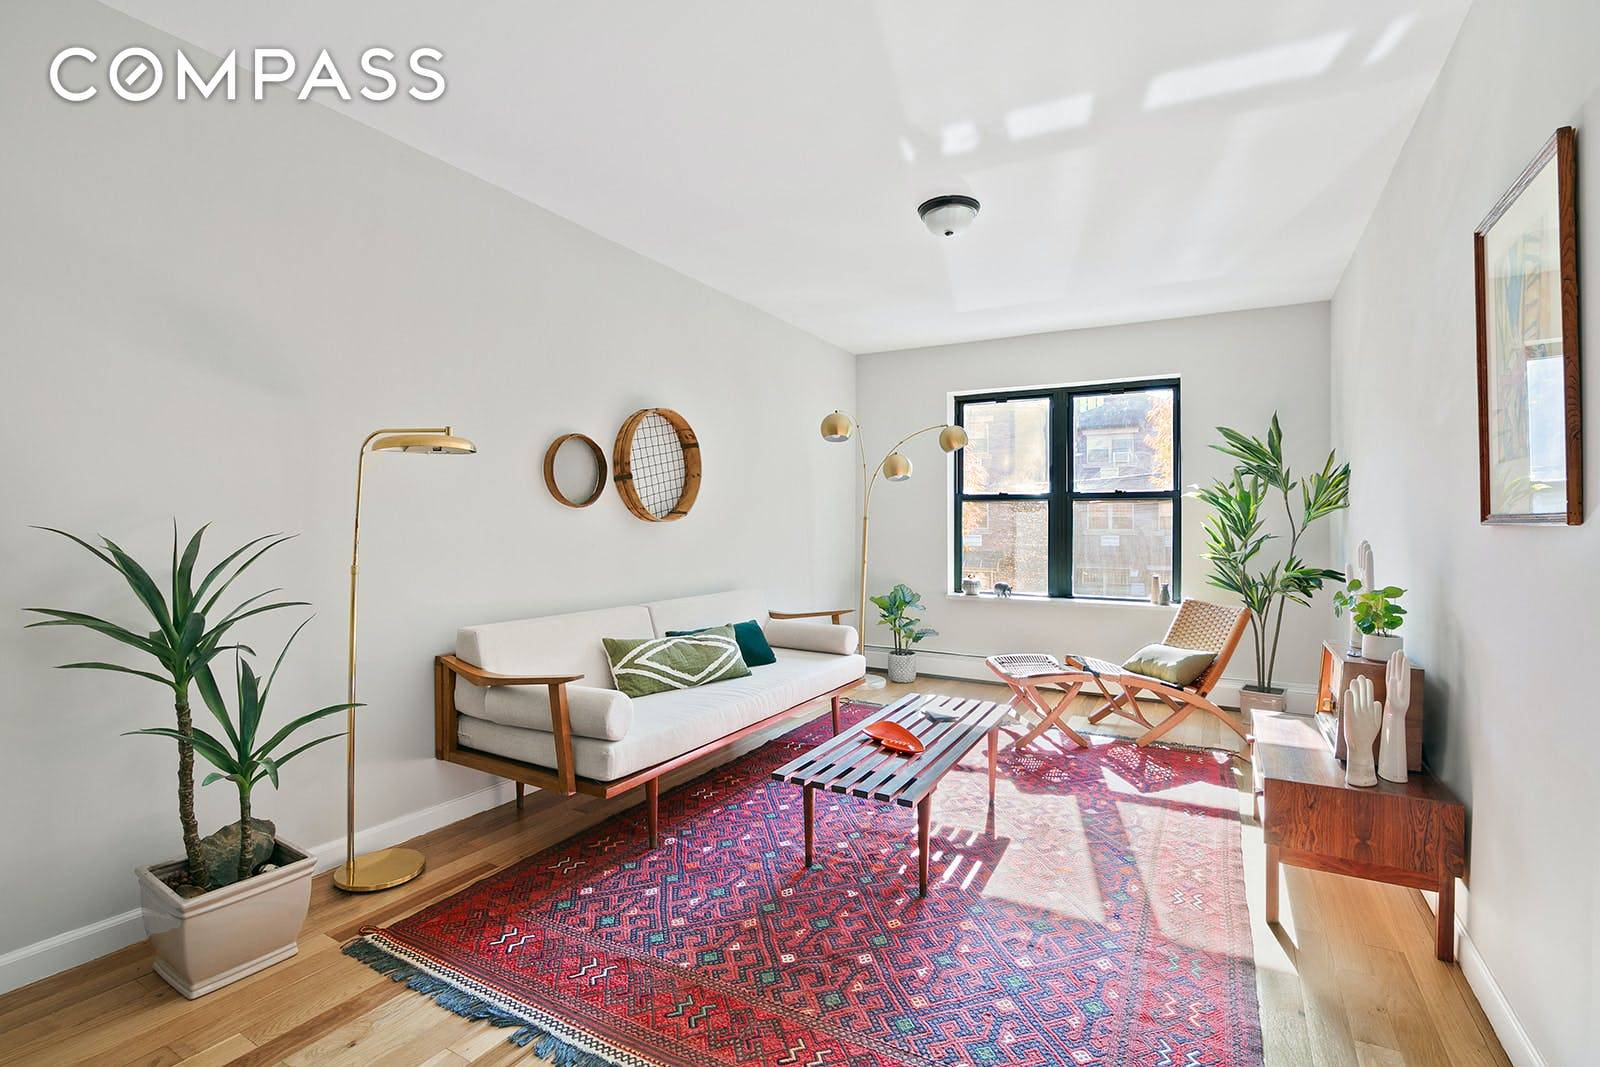 Welcome into this perfectly serene and sunlit apartment.